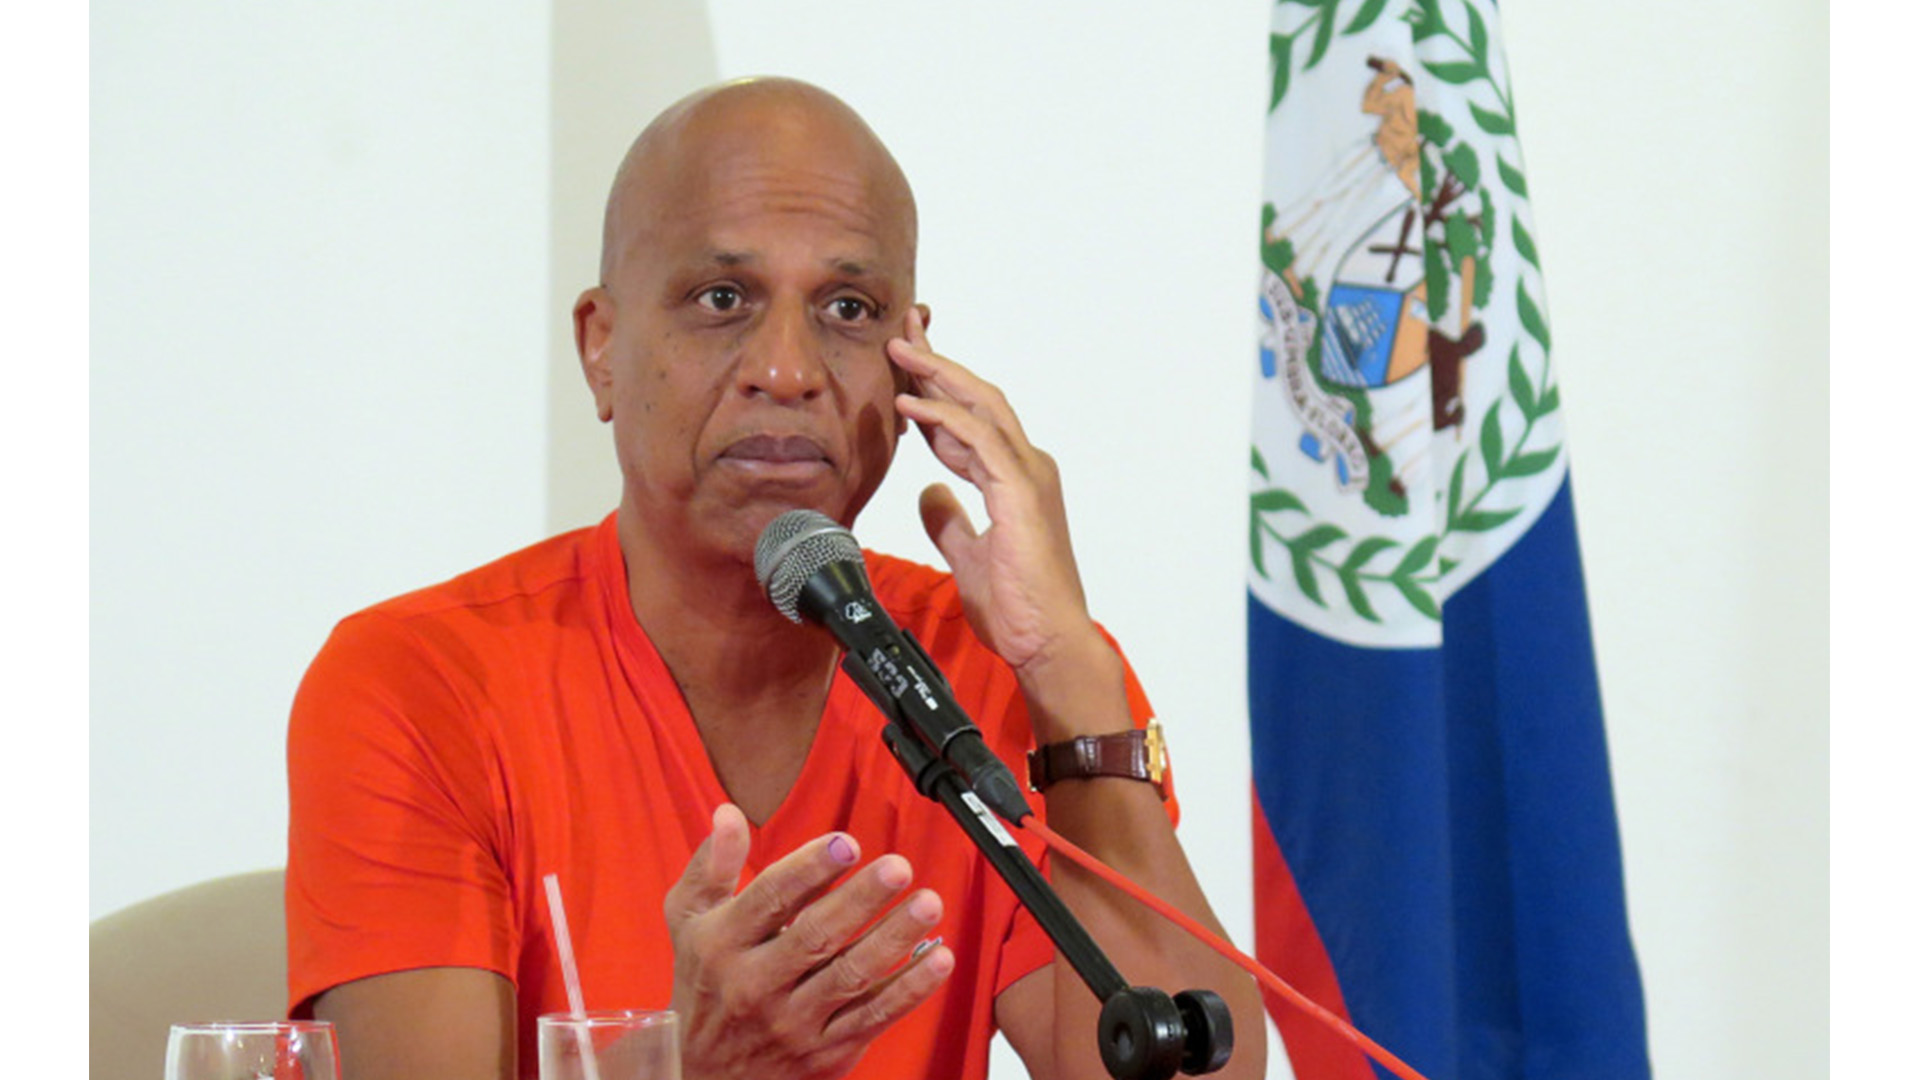 Corona infection to Belize's PM